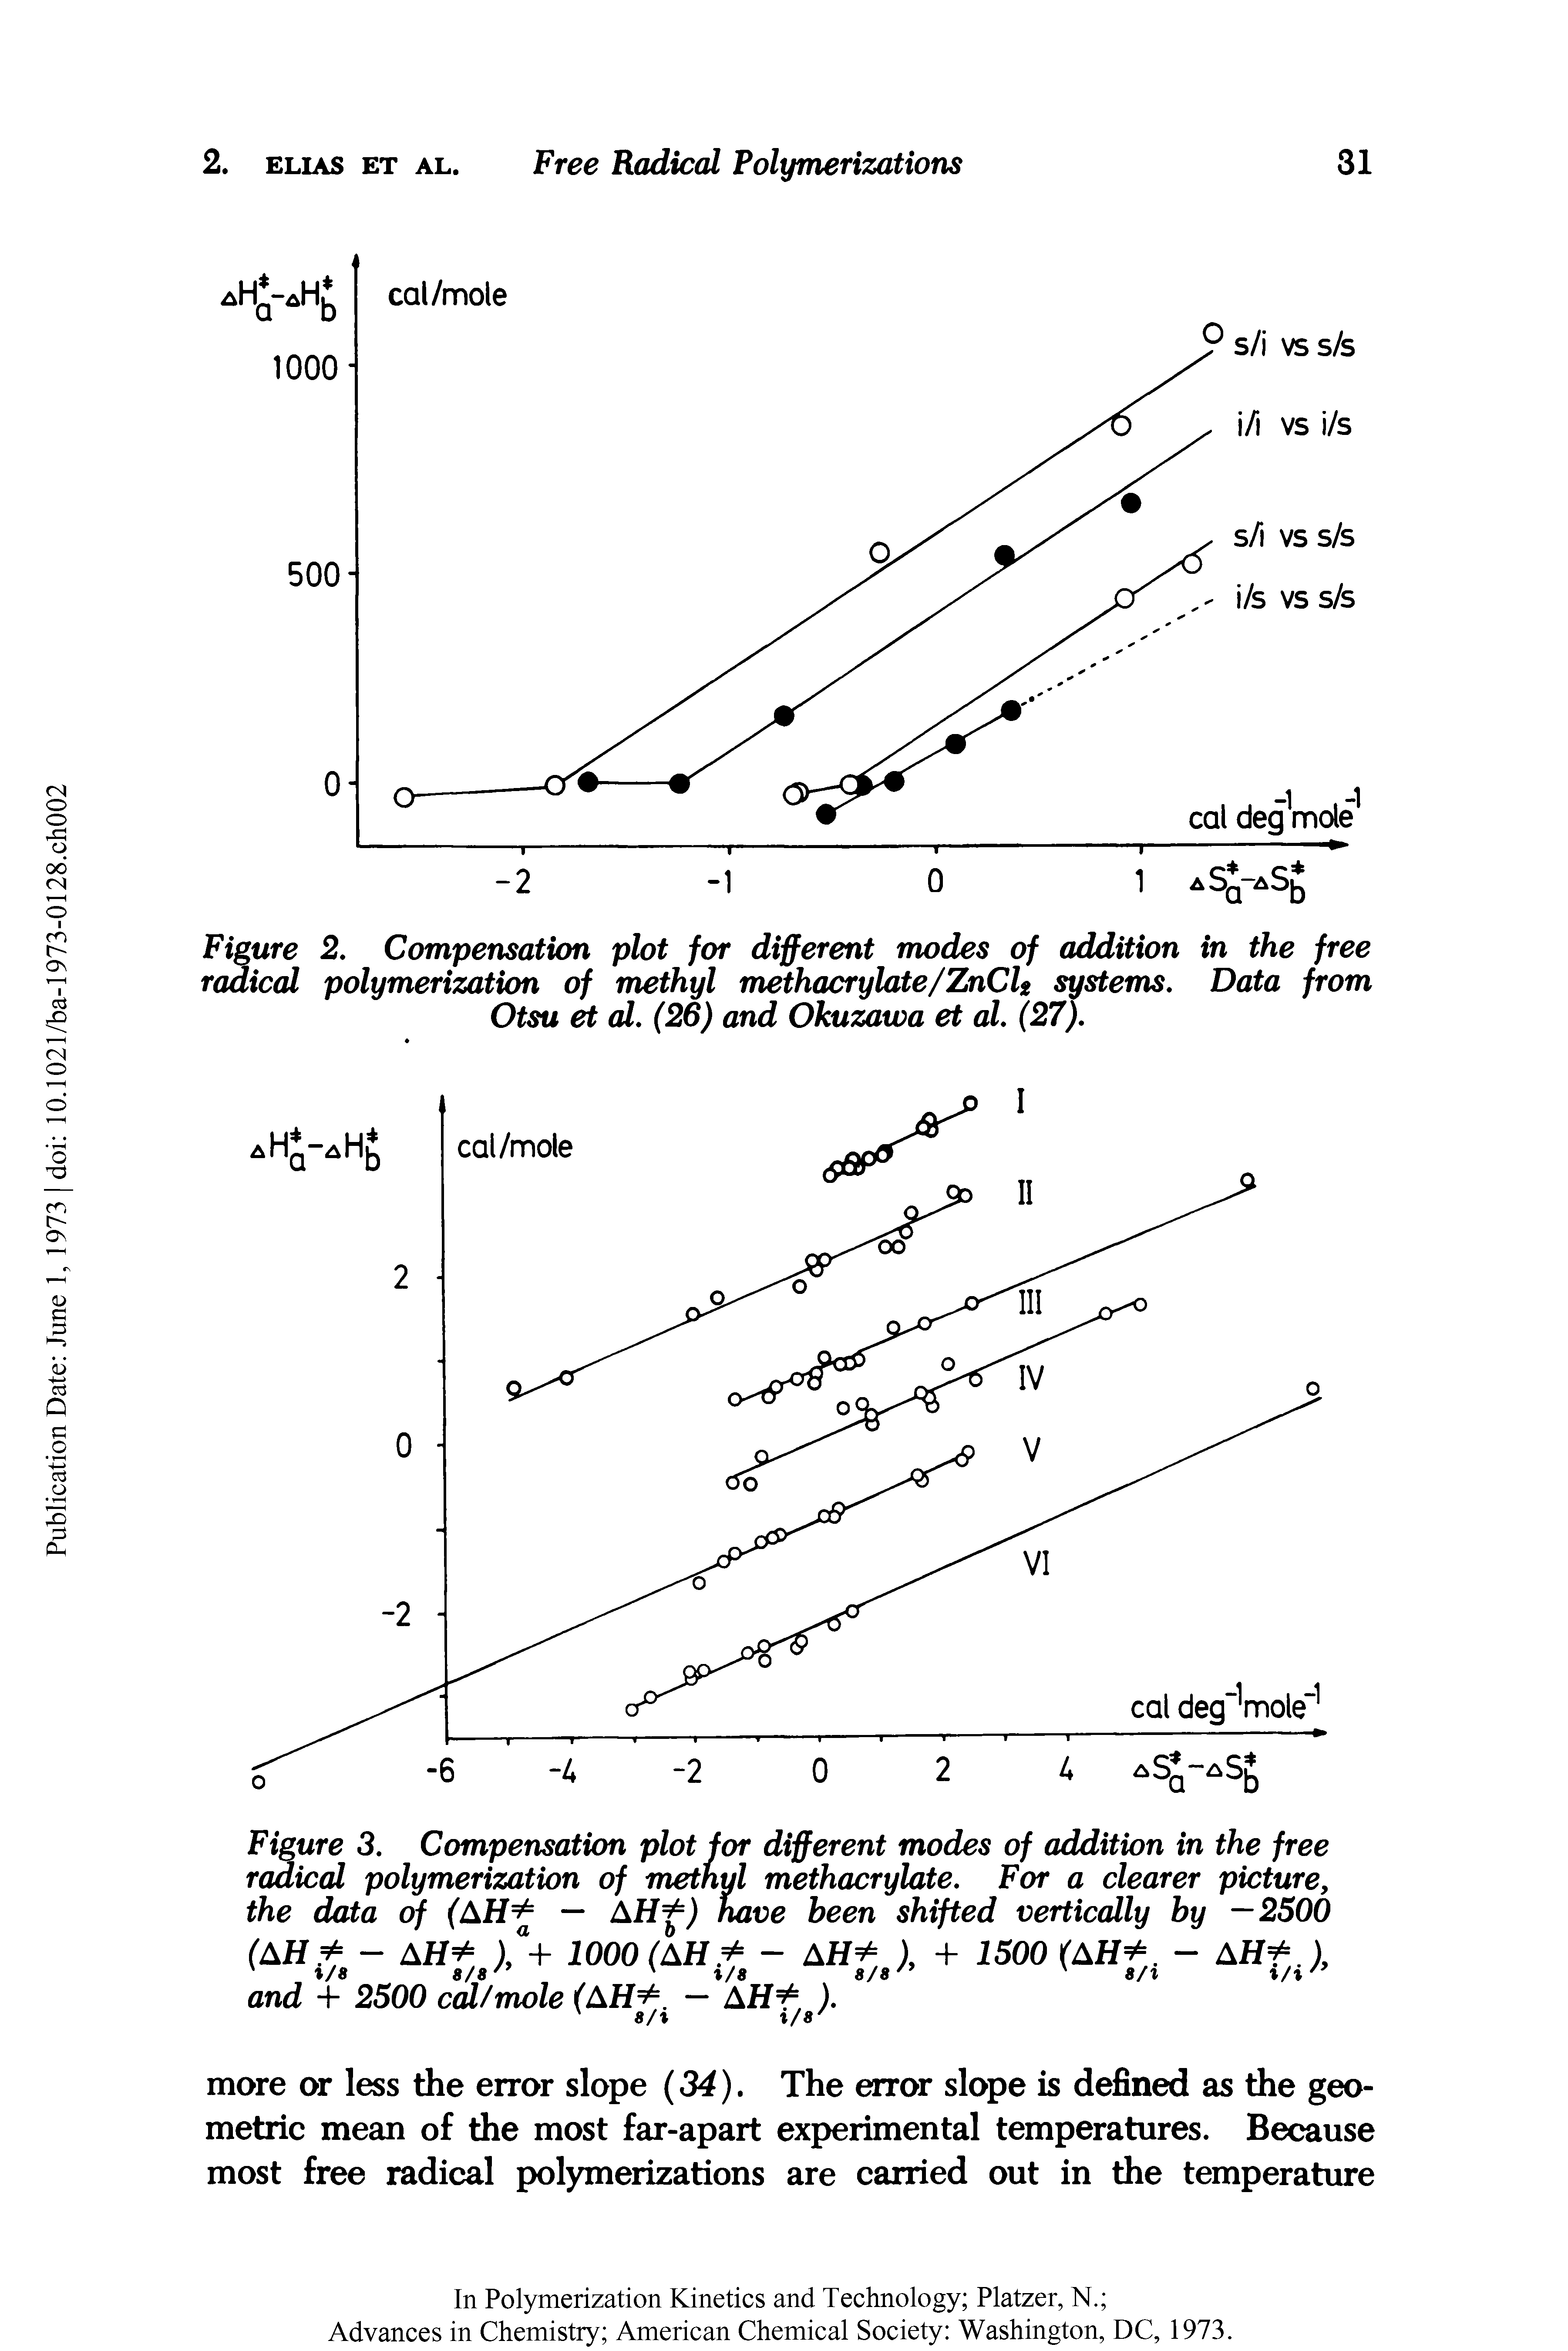 Figure 2. Compensation plot for different modes of addition in the free radical polymerization of methyl methacrylate/ZnCk systems. Data from Otsu et al. (26) and Okuzawa et al. (27).